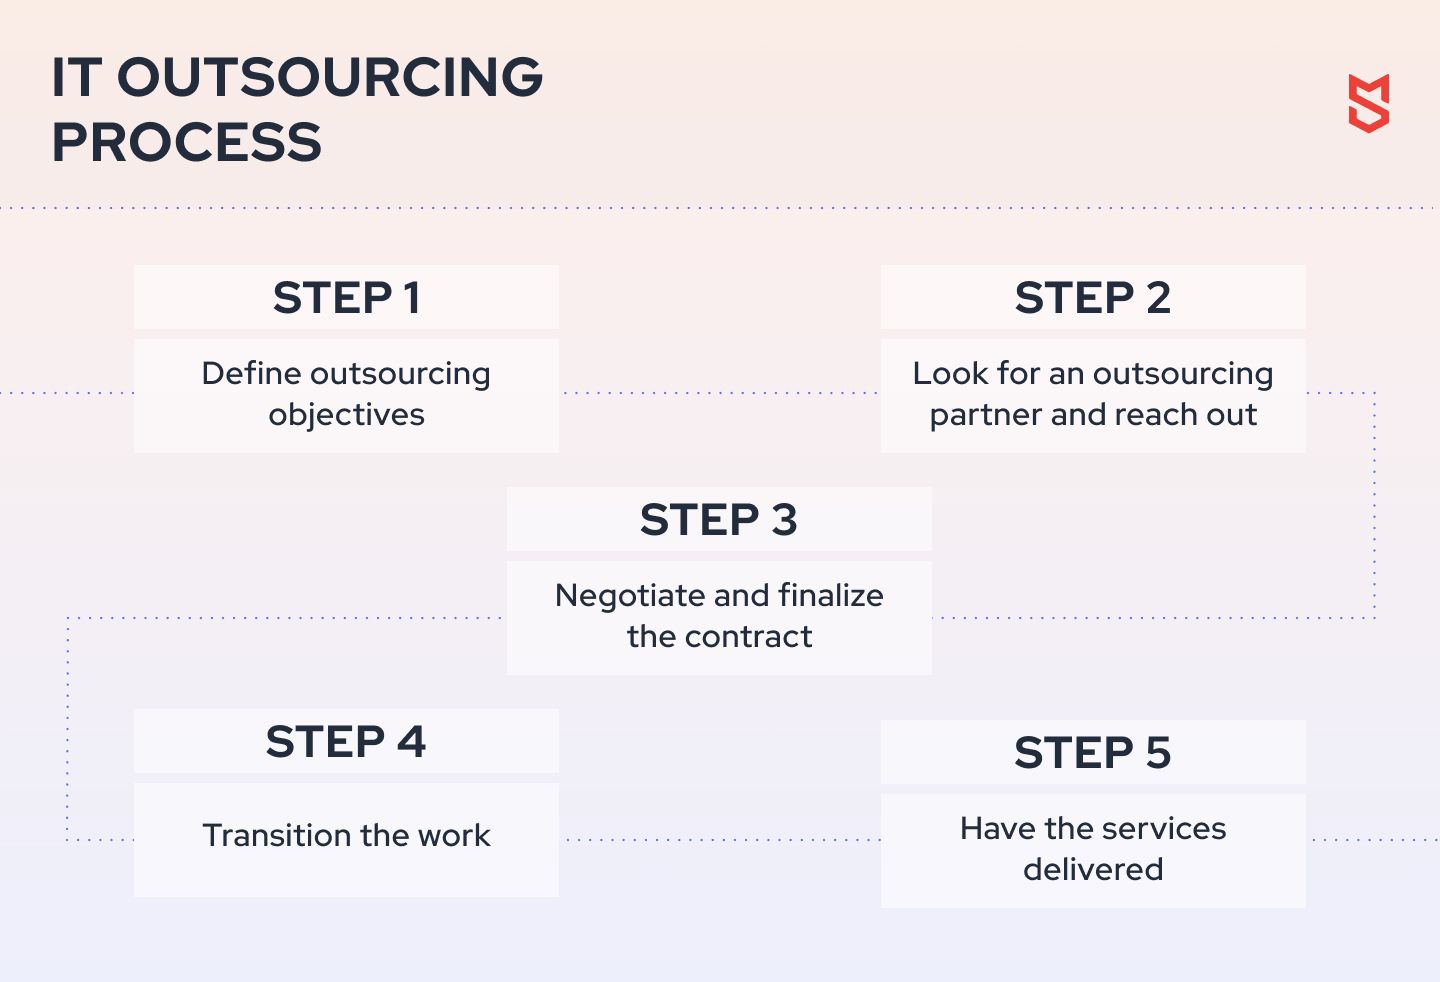 IT outsourcing process